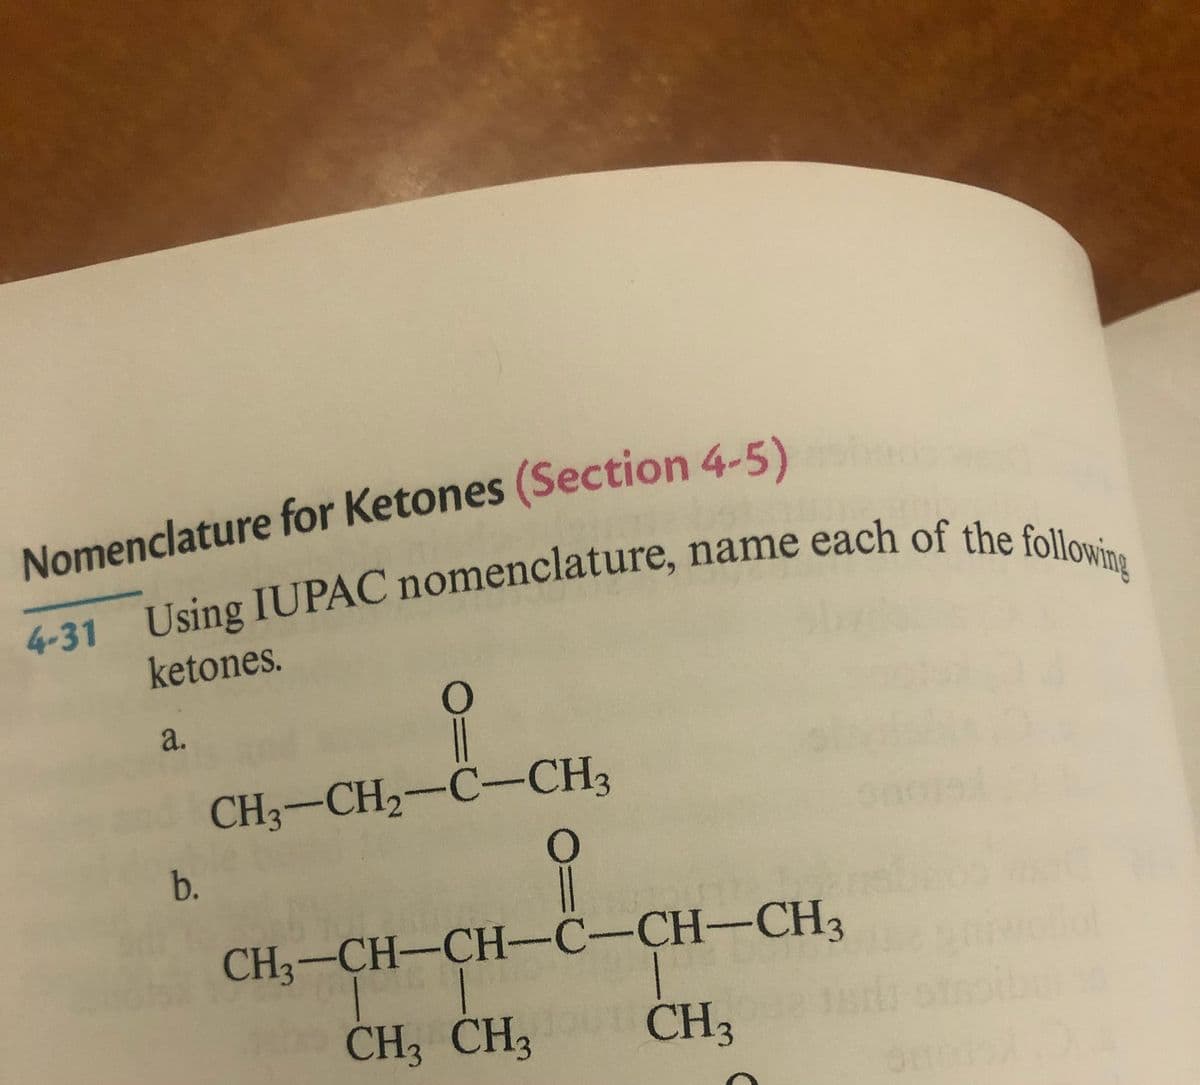 Nomenclature for Ketones (Section 4-5)
31 Using IUPAC nomenclature, name each of the foll. .
ketones.
a.
CH3-CH2-C-CH3
b.
CH3-CH-CH--C-CH-CH3
CH3 CH3
CH3
